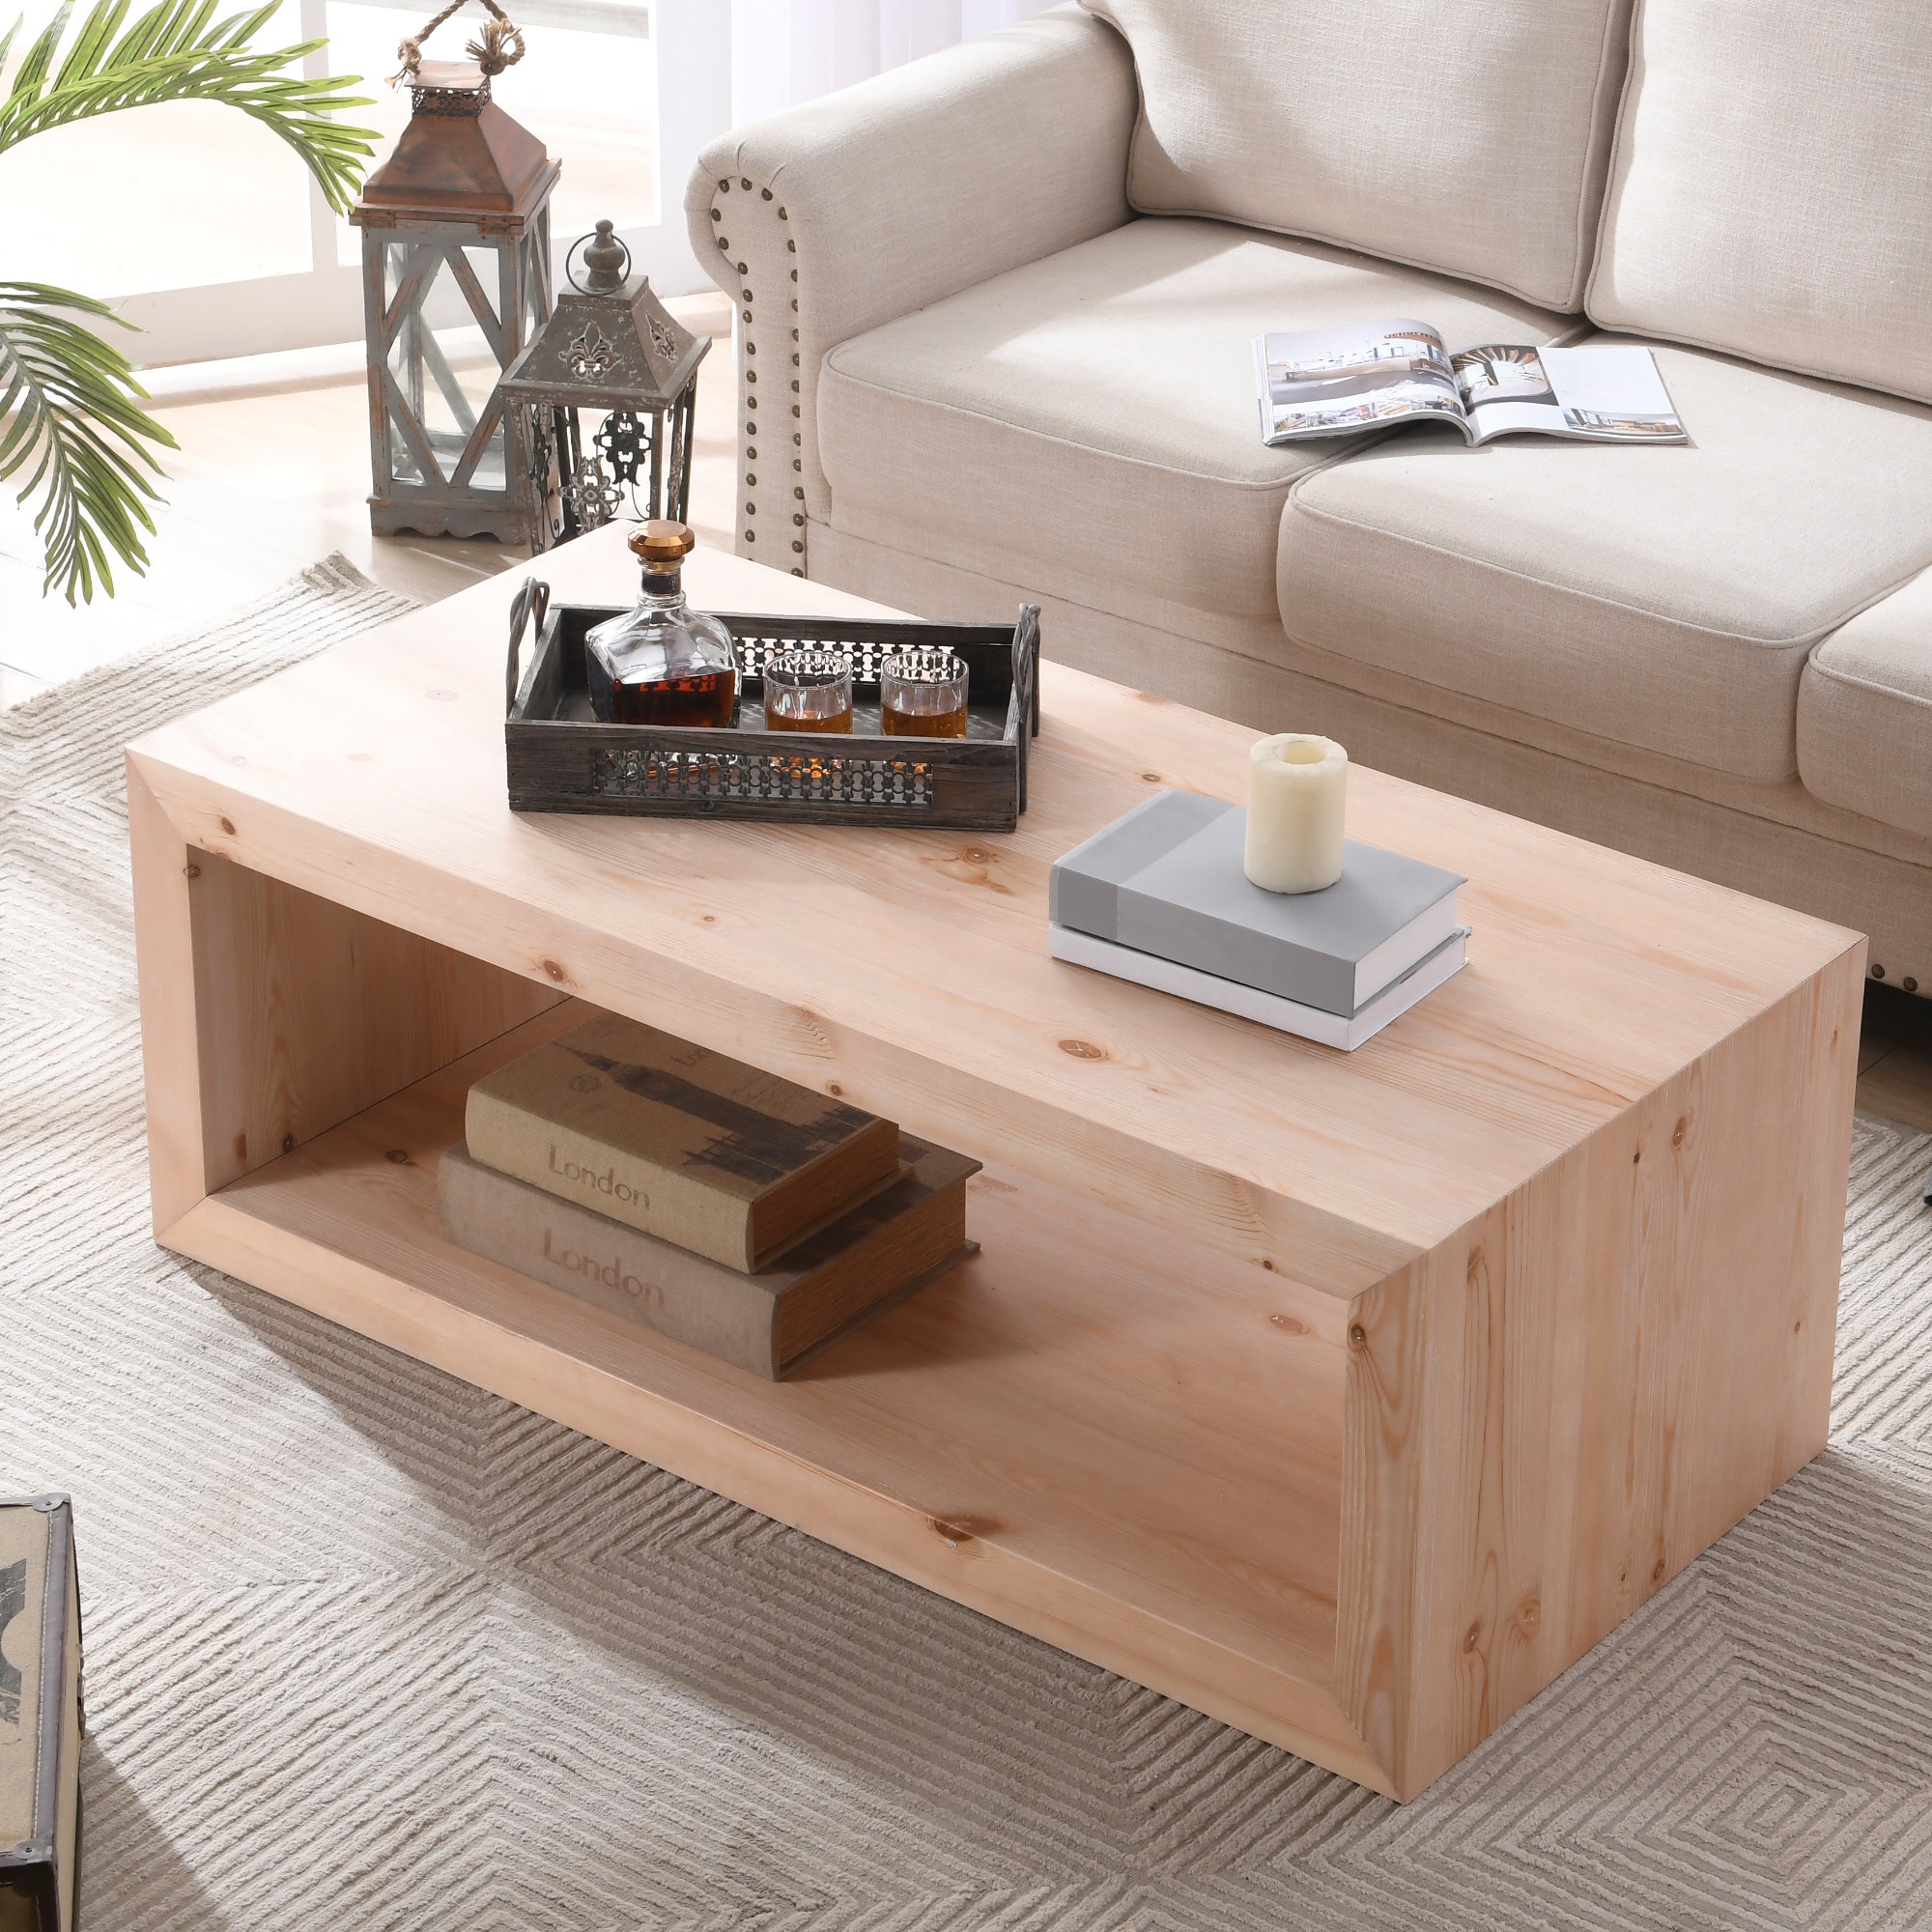 Pine wood coffee table with storage